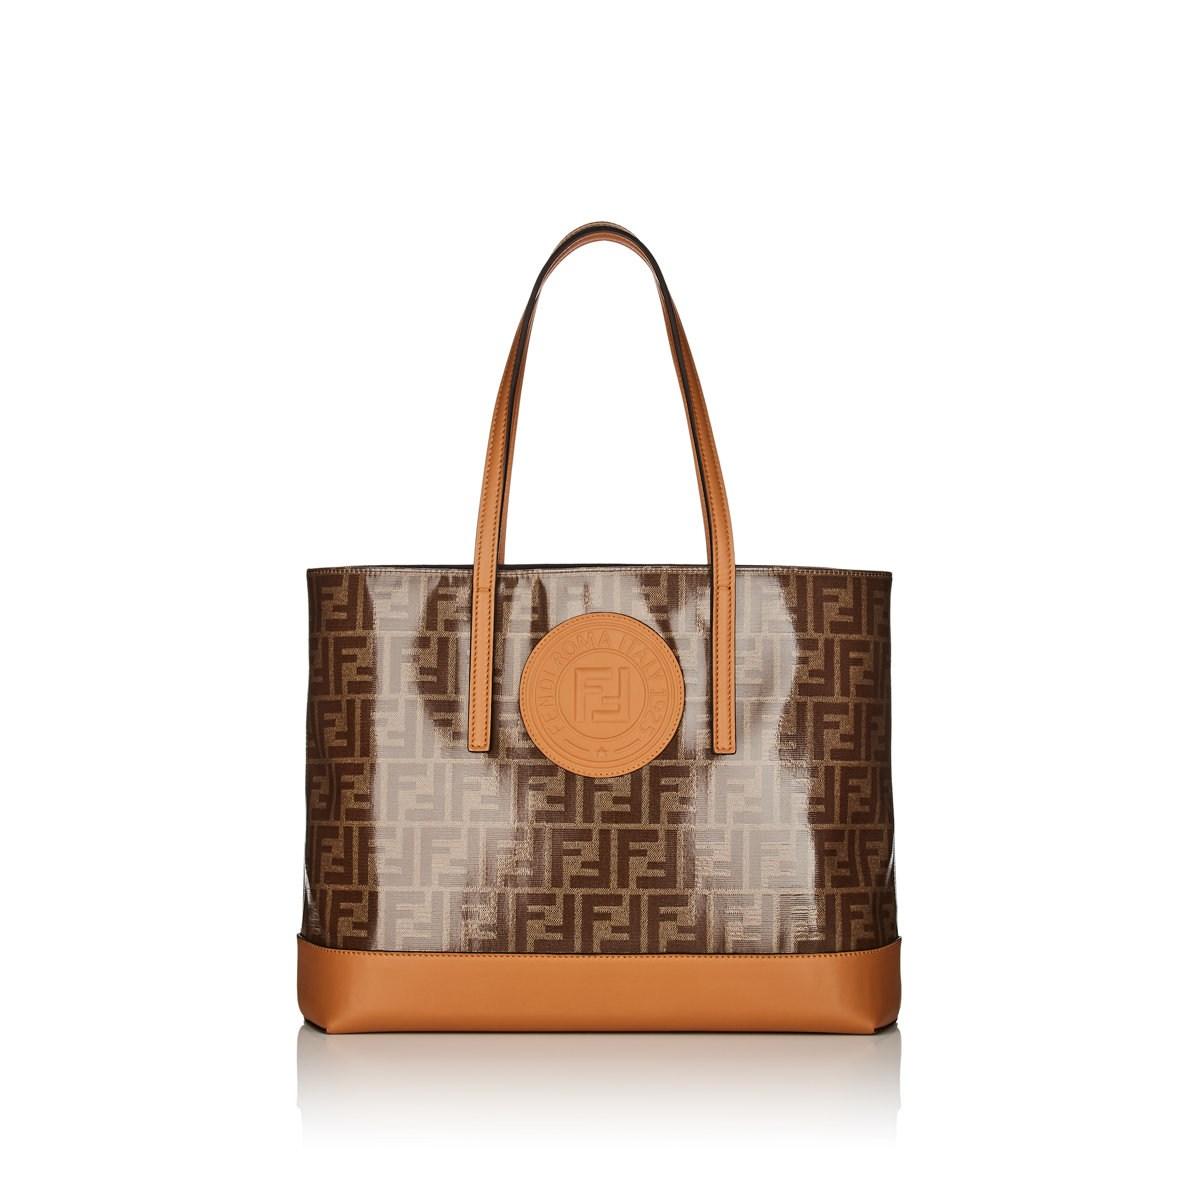 Fendi Coated Canvas & Leather Tote Bag in Brown - Lyst